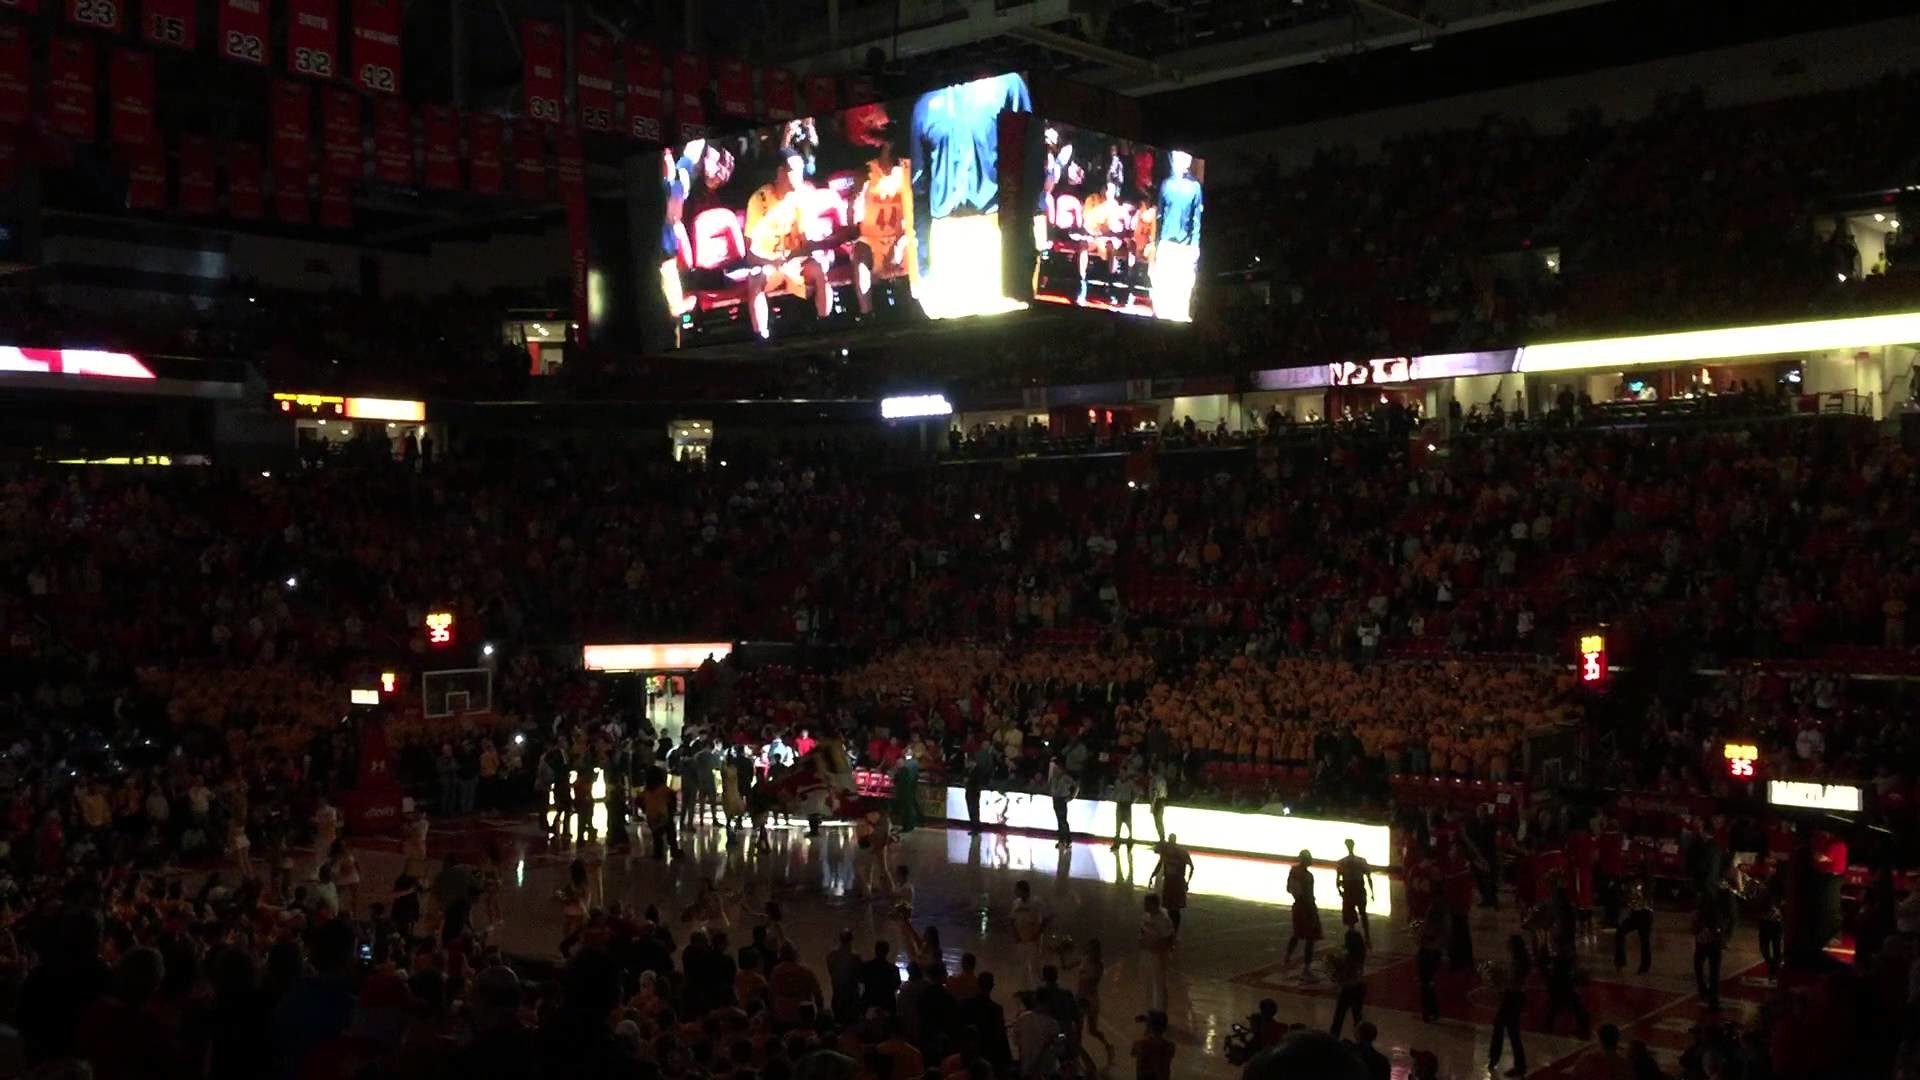 1920x1080 Maryland Terrapins vs Wisconsin Badgers Men's Basketball Introductions  2.24.15